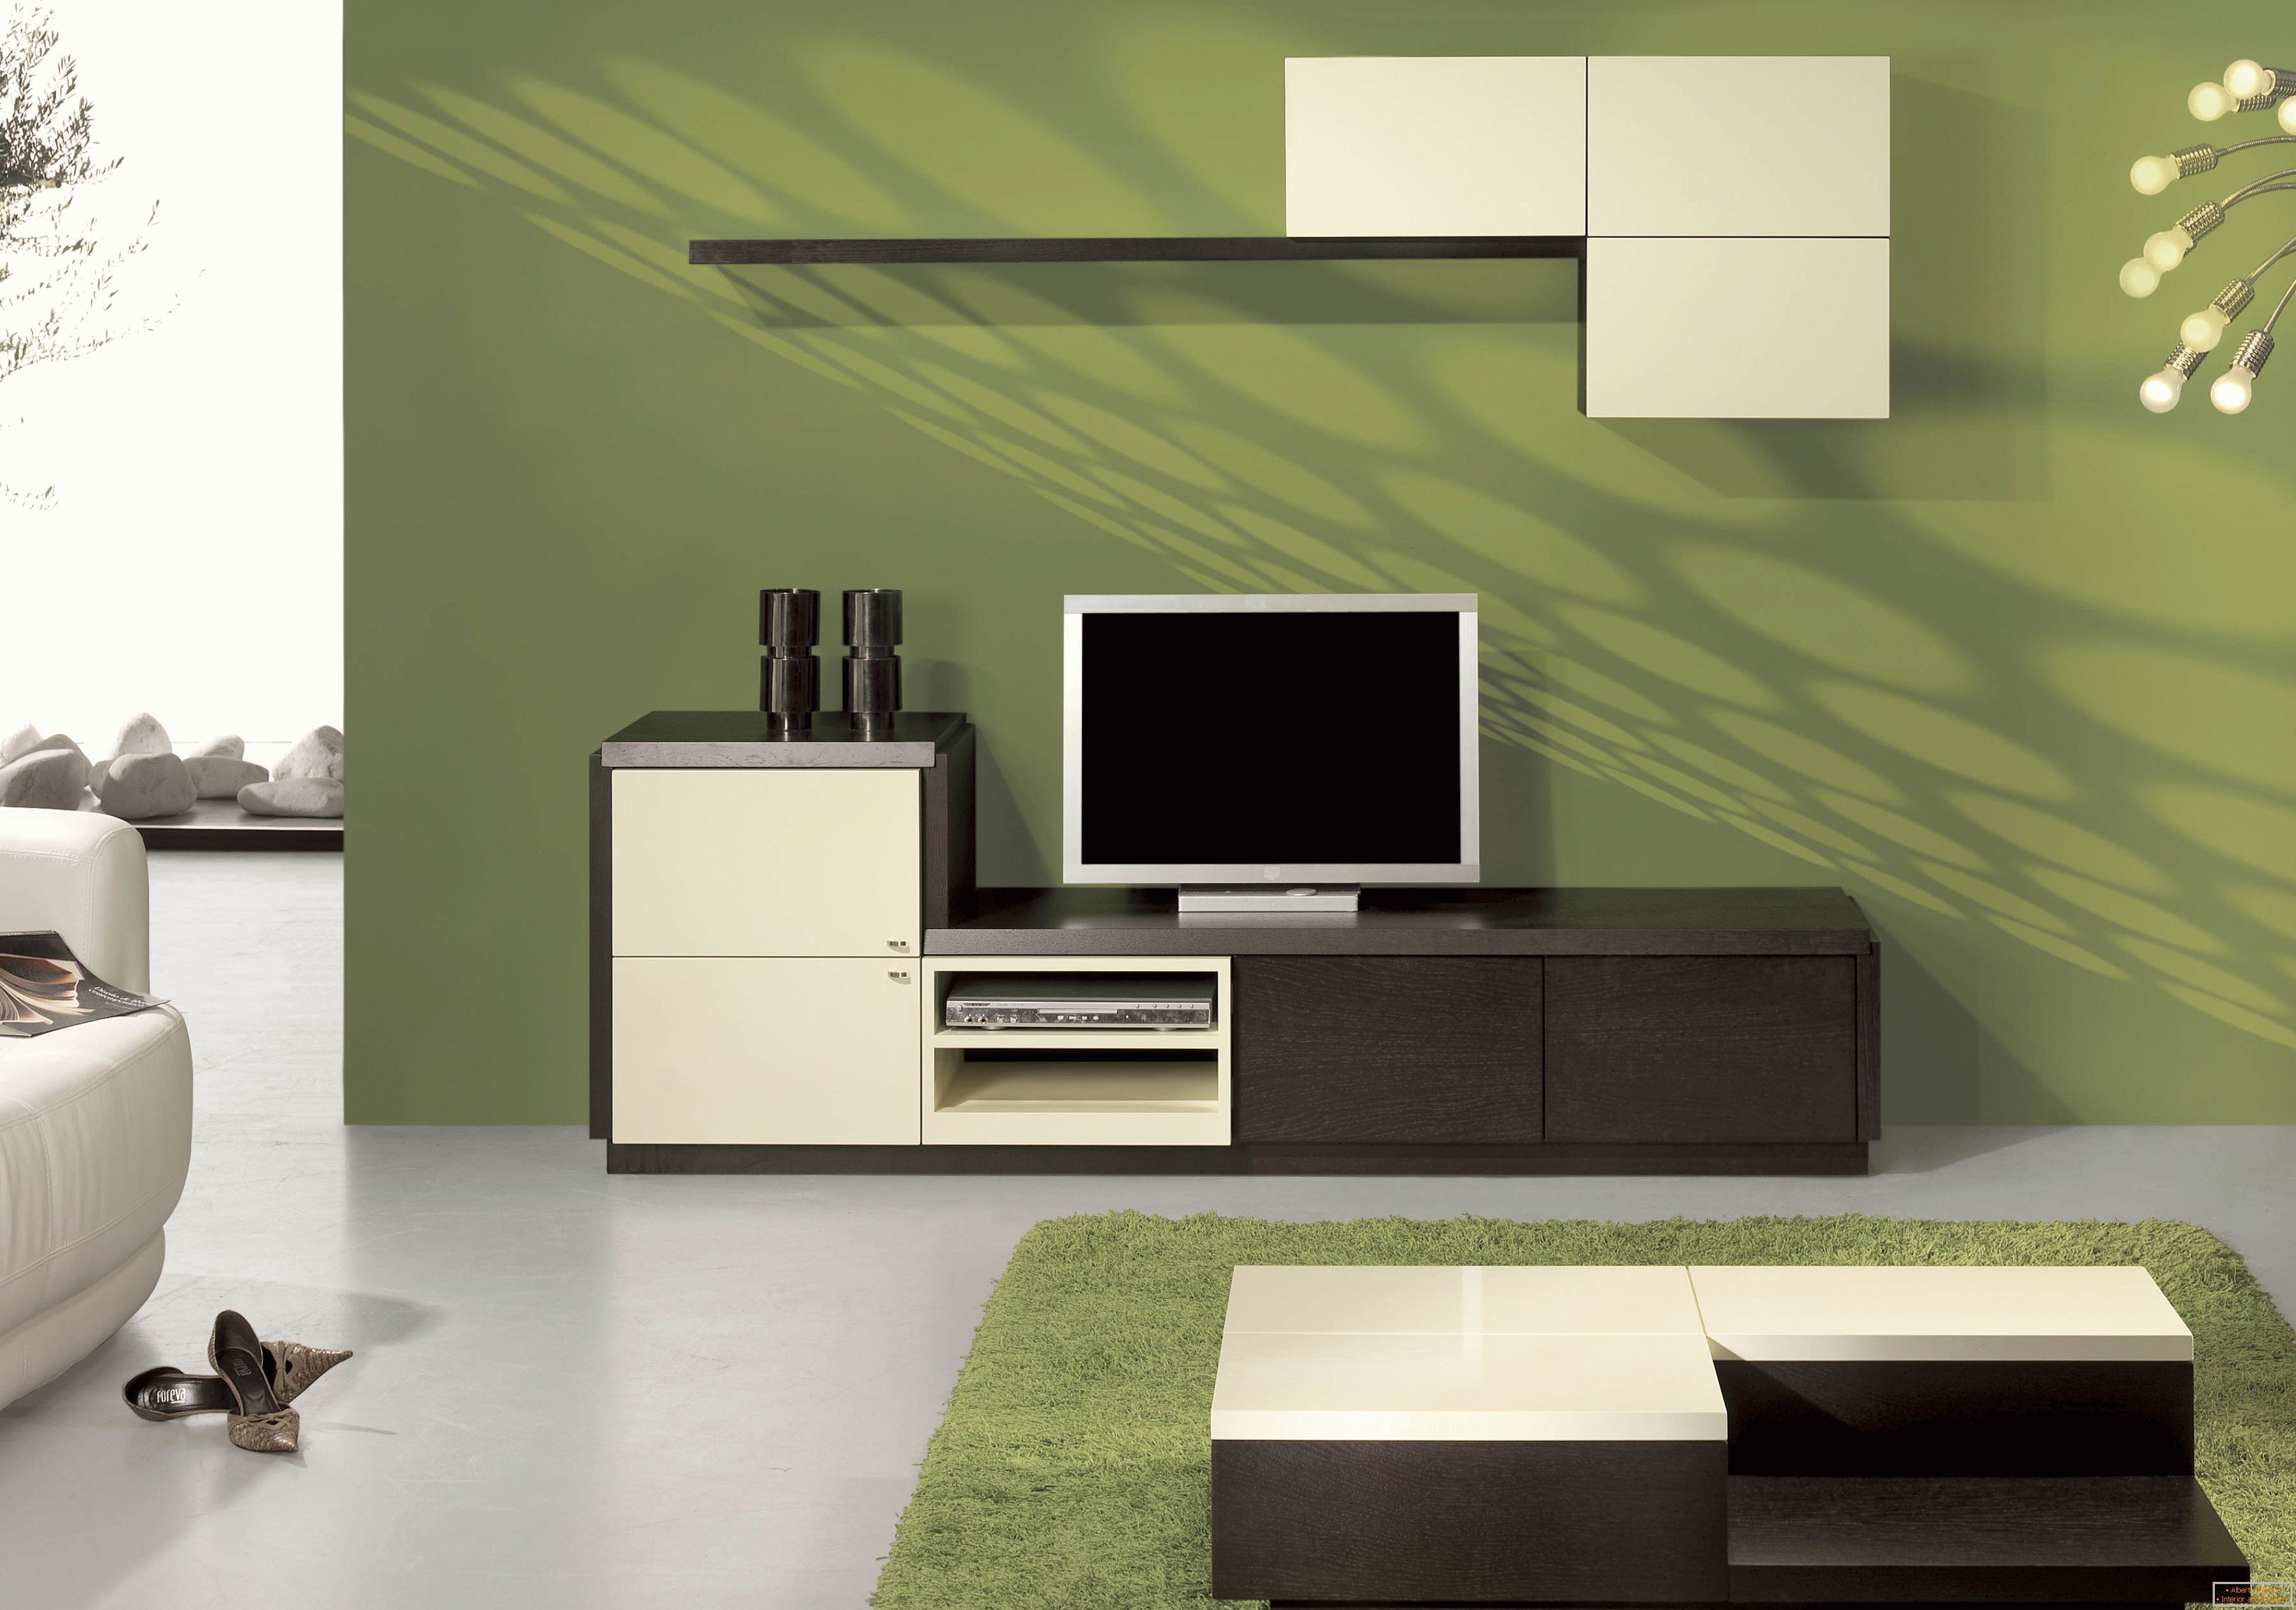 Olive, white and chocolate in the design of the living room